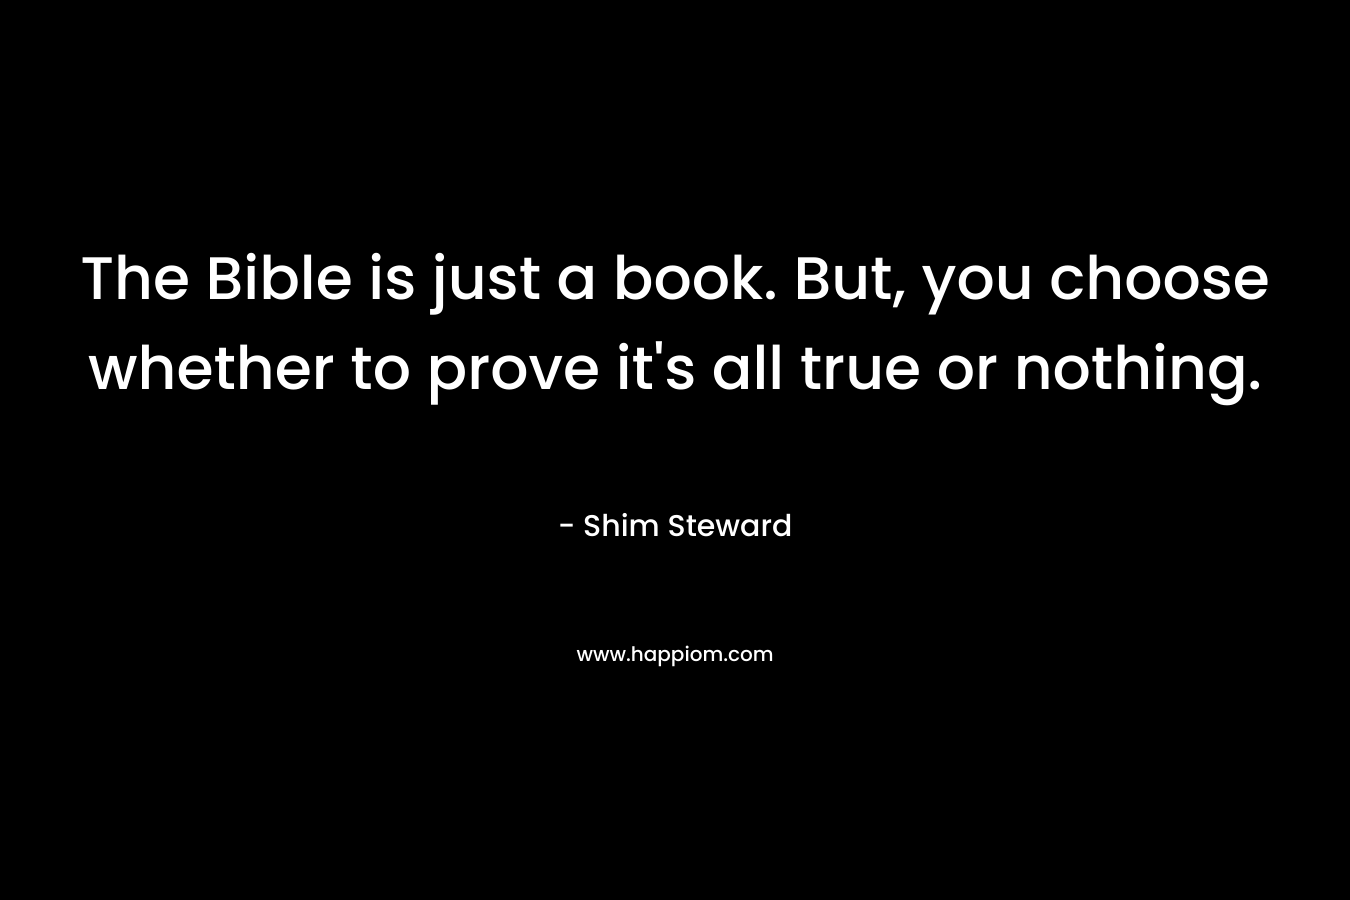 The Bible is just a book. But, you choose whether to prove it's all true or nothing.